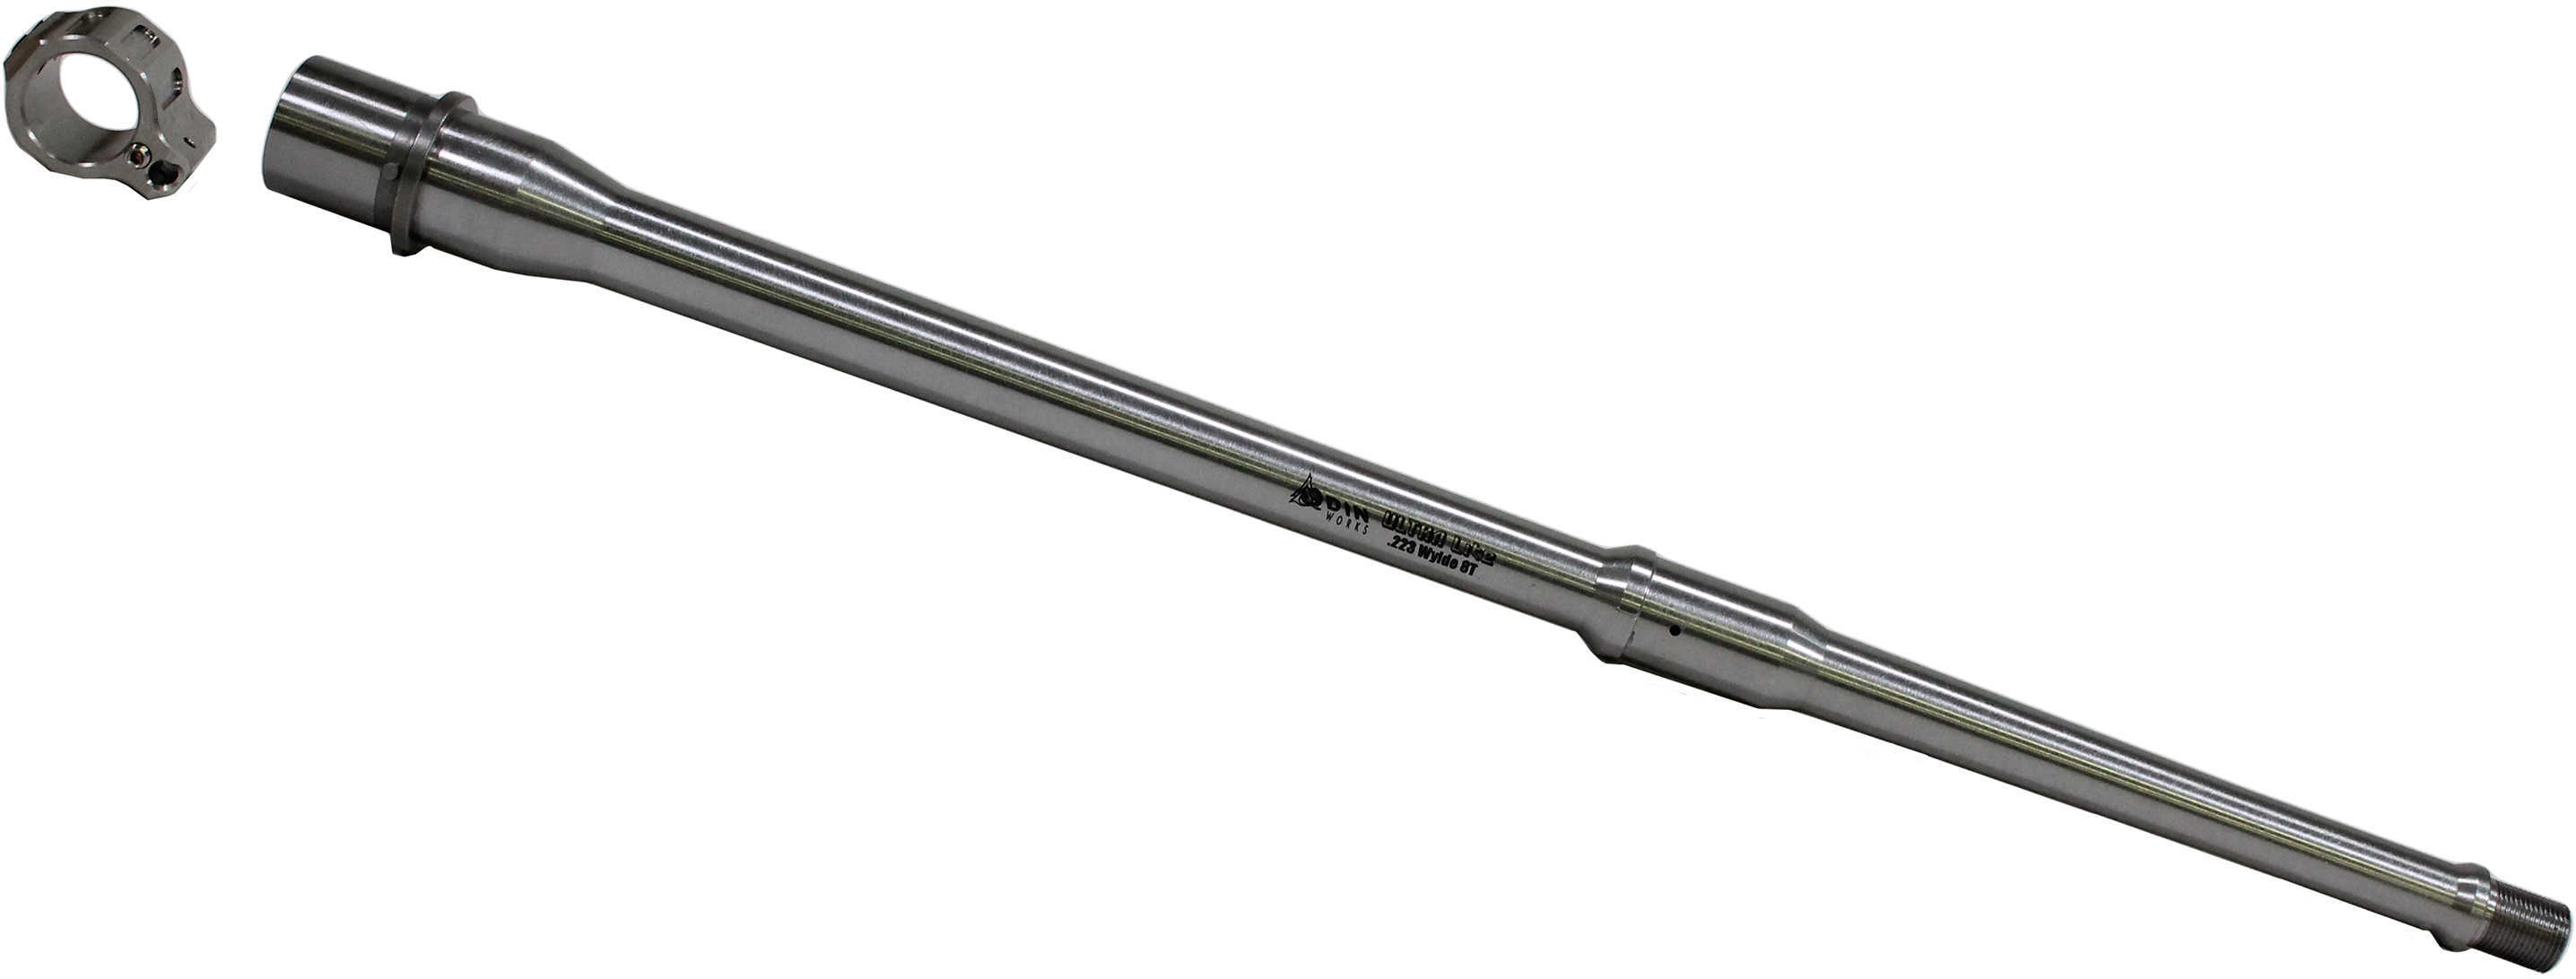 Odin Works Barrel Fits AR15 223 Wylde 16.1" Threaded 1/2-28 ULTRAlite Profile Stainless Steel Mid Gas Length Includes Tu